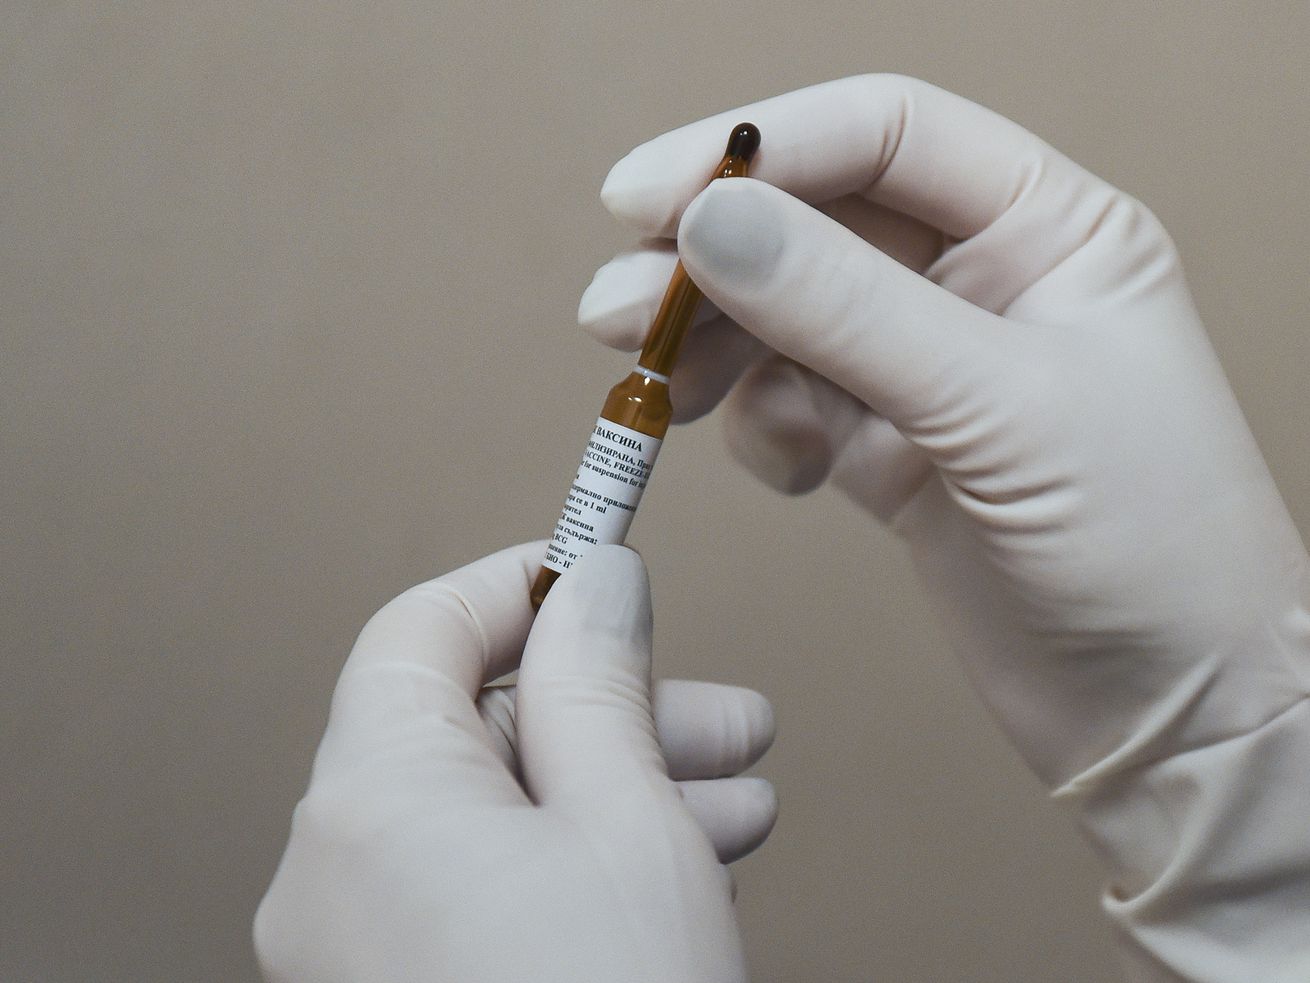 A pair of hands, in white medical latex gloves, holds a single BCG vaccine dose in a very small brown bottle. 